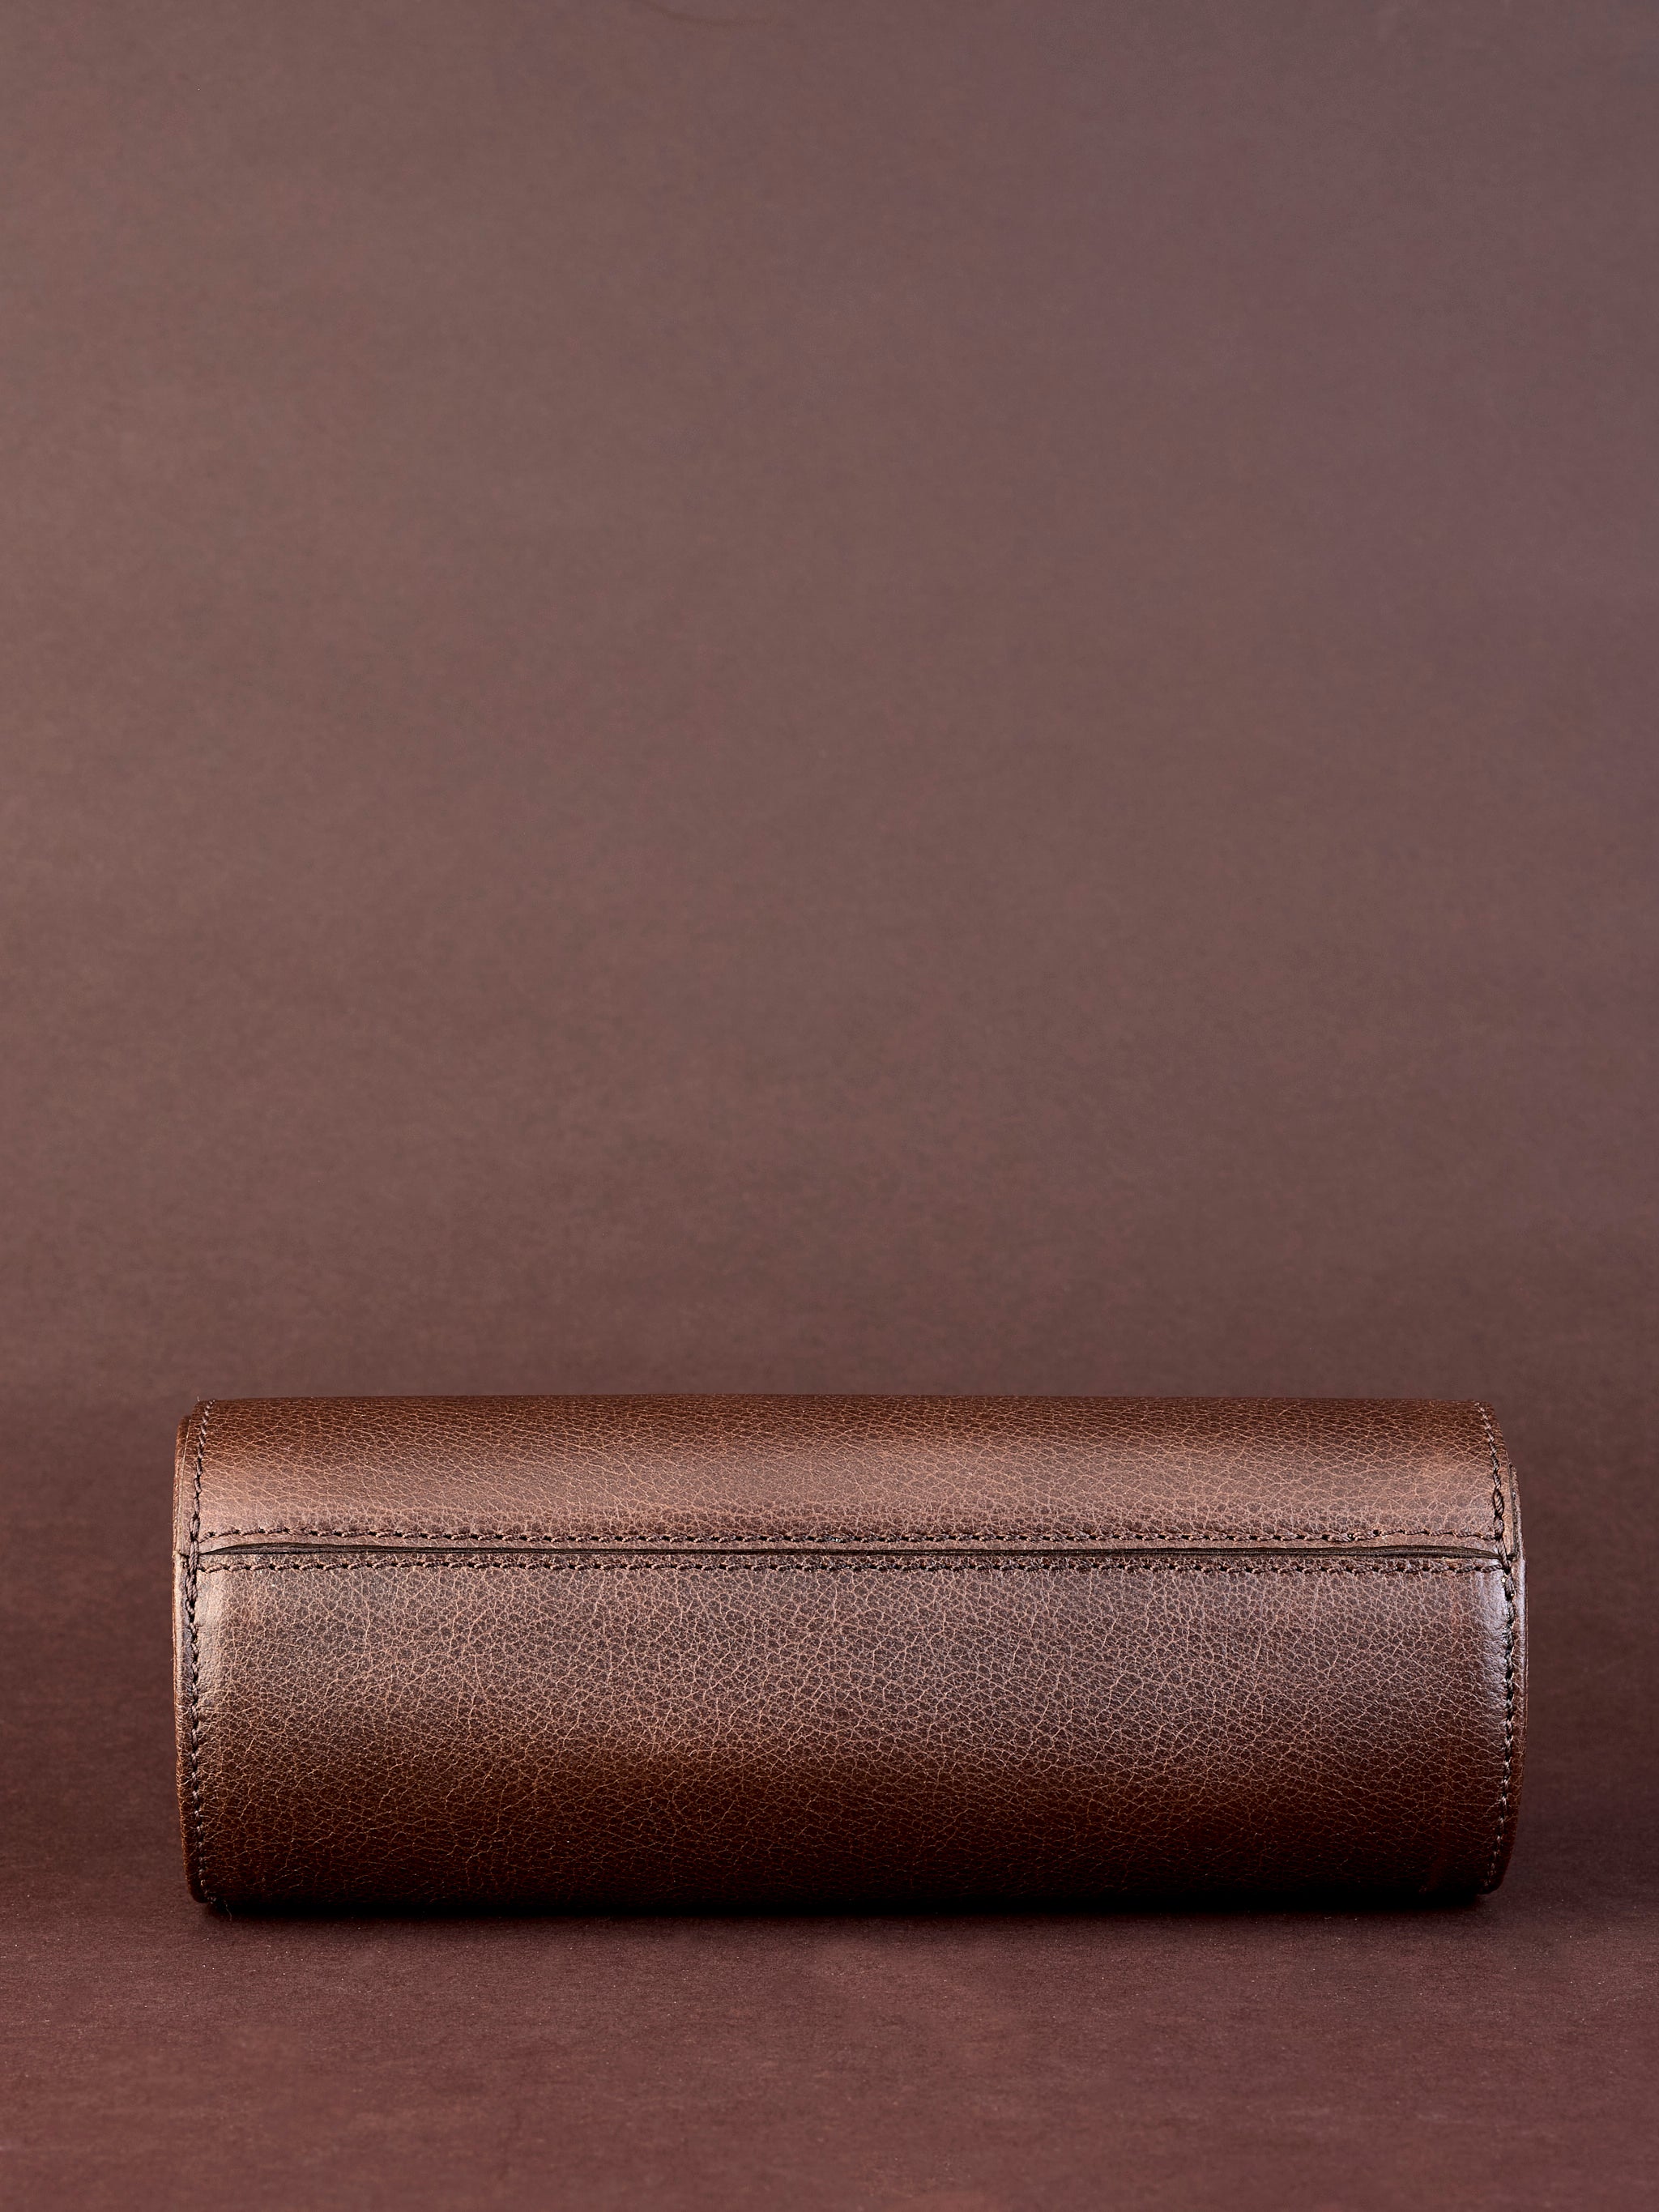 Travel Watch Case by Capra Leather